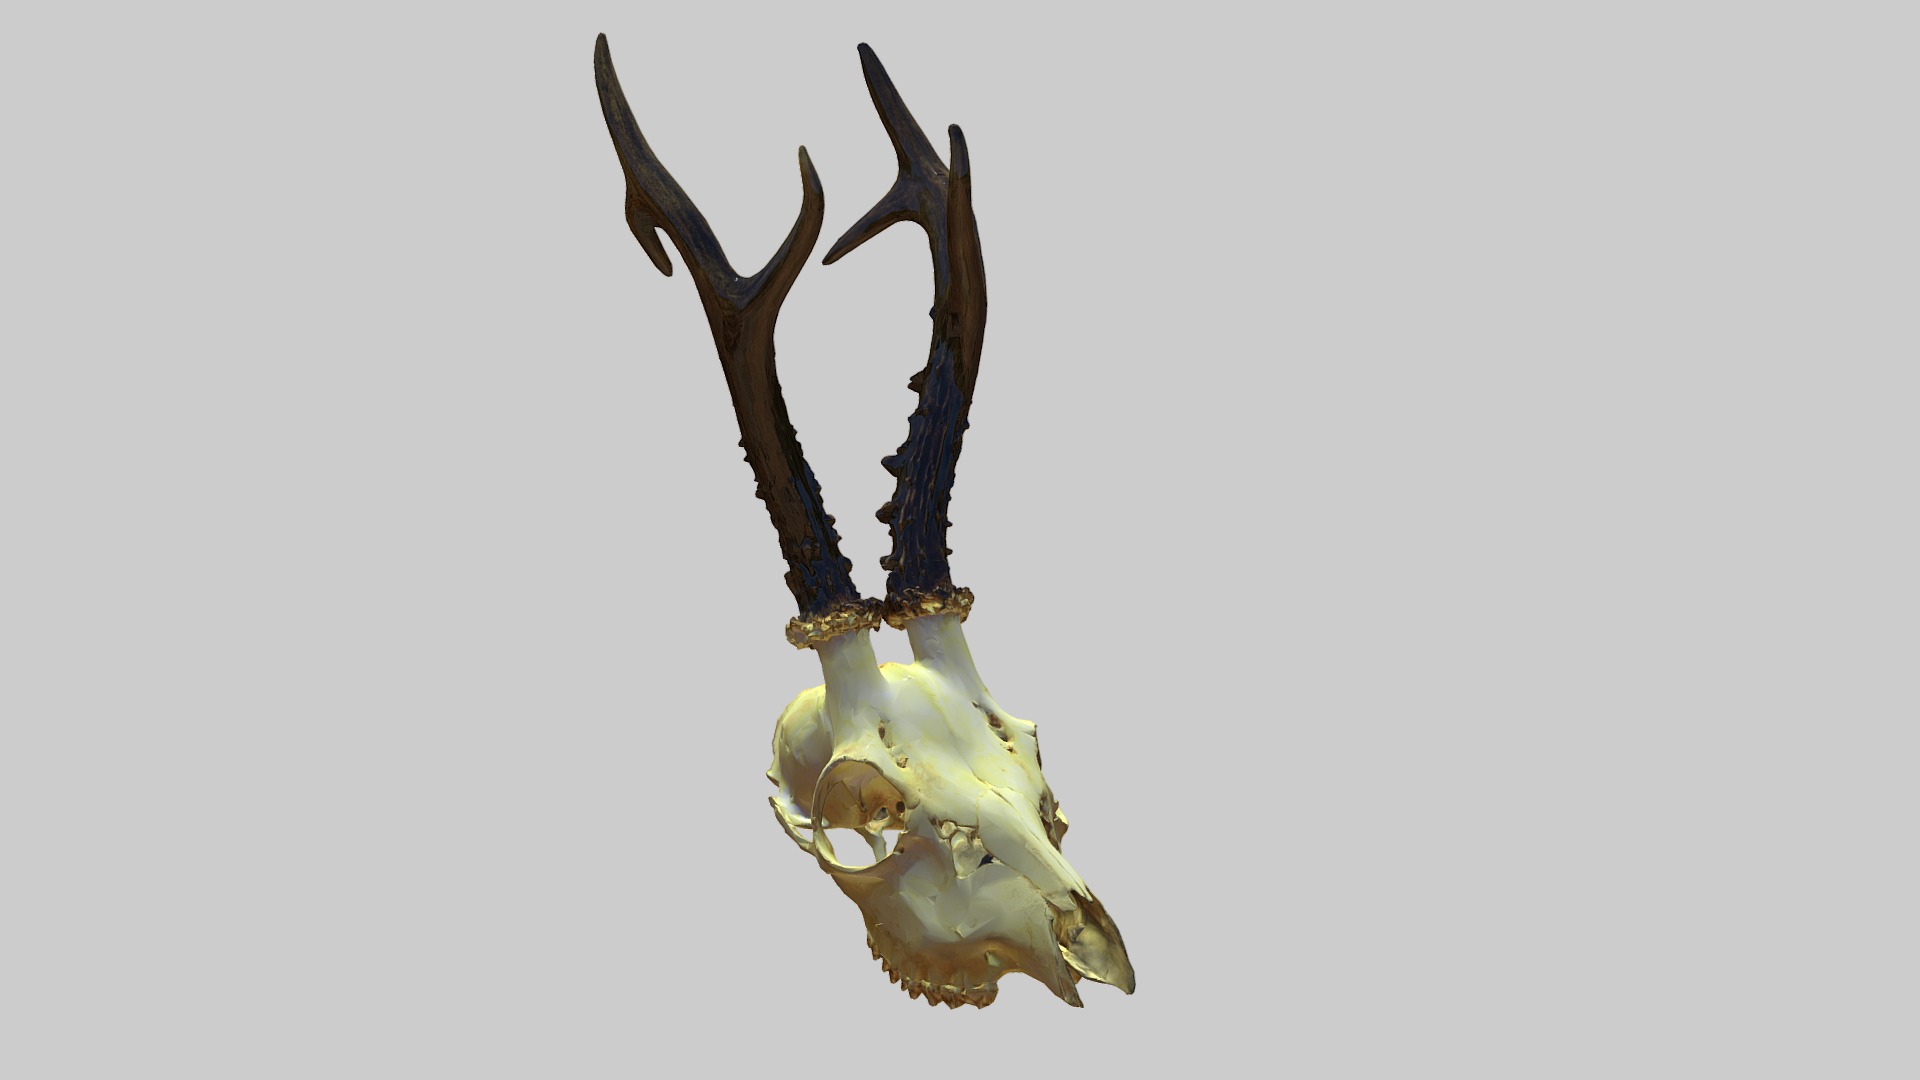 3D model Poroże - This is a 3D model of the Poroże. The 3D model is about a close-up of a moose head.